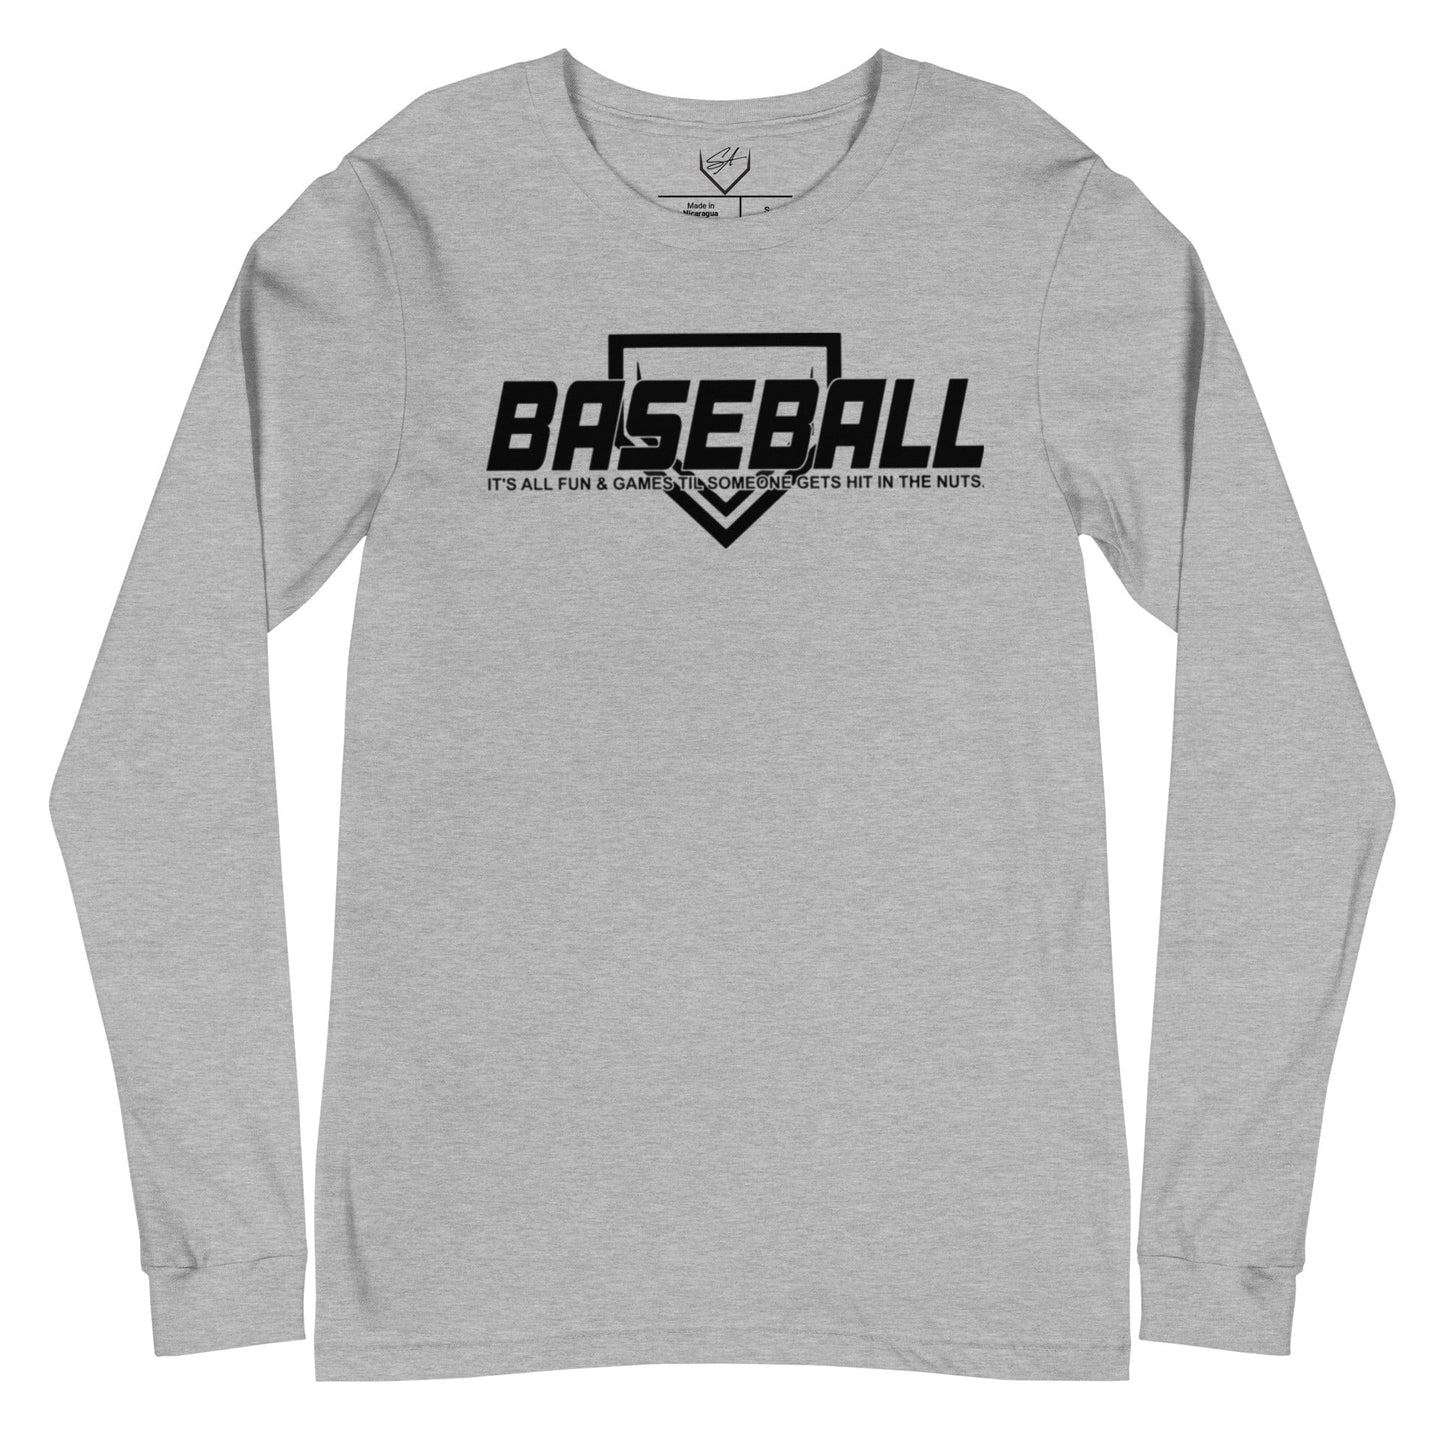 Baseball Its All Fun and Games - Adult Long Sleeve